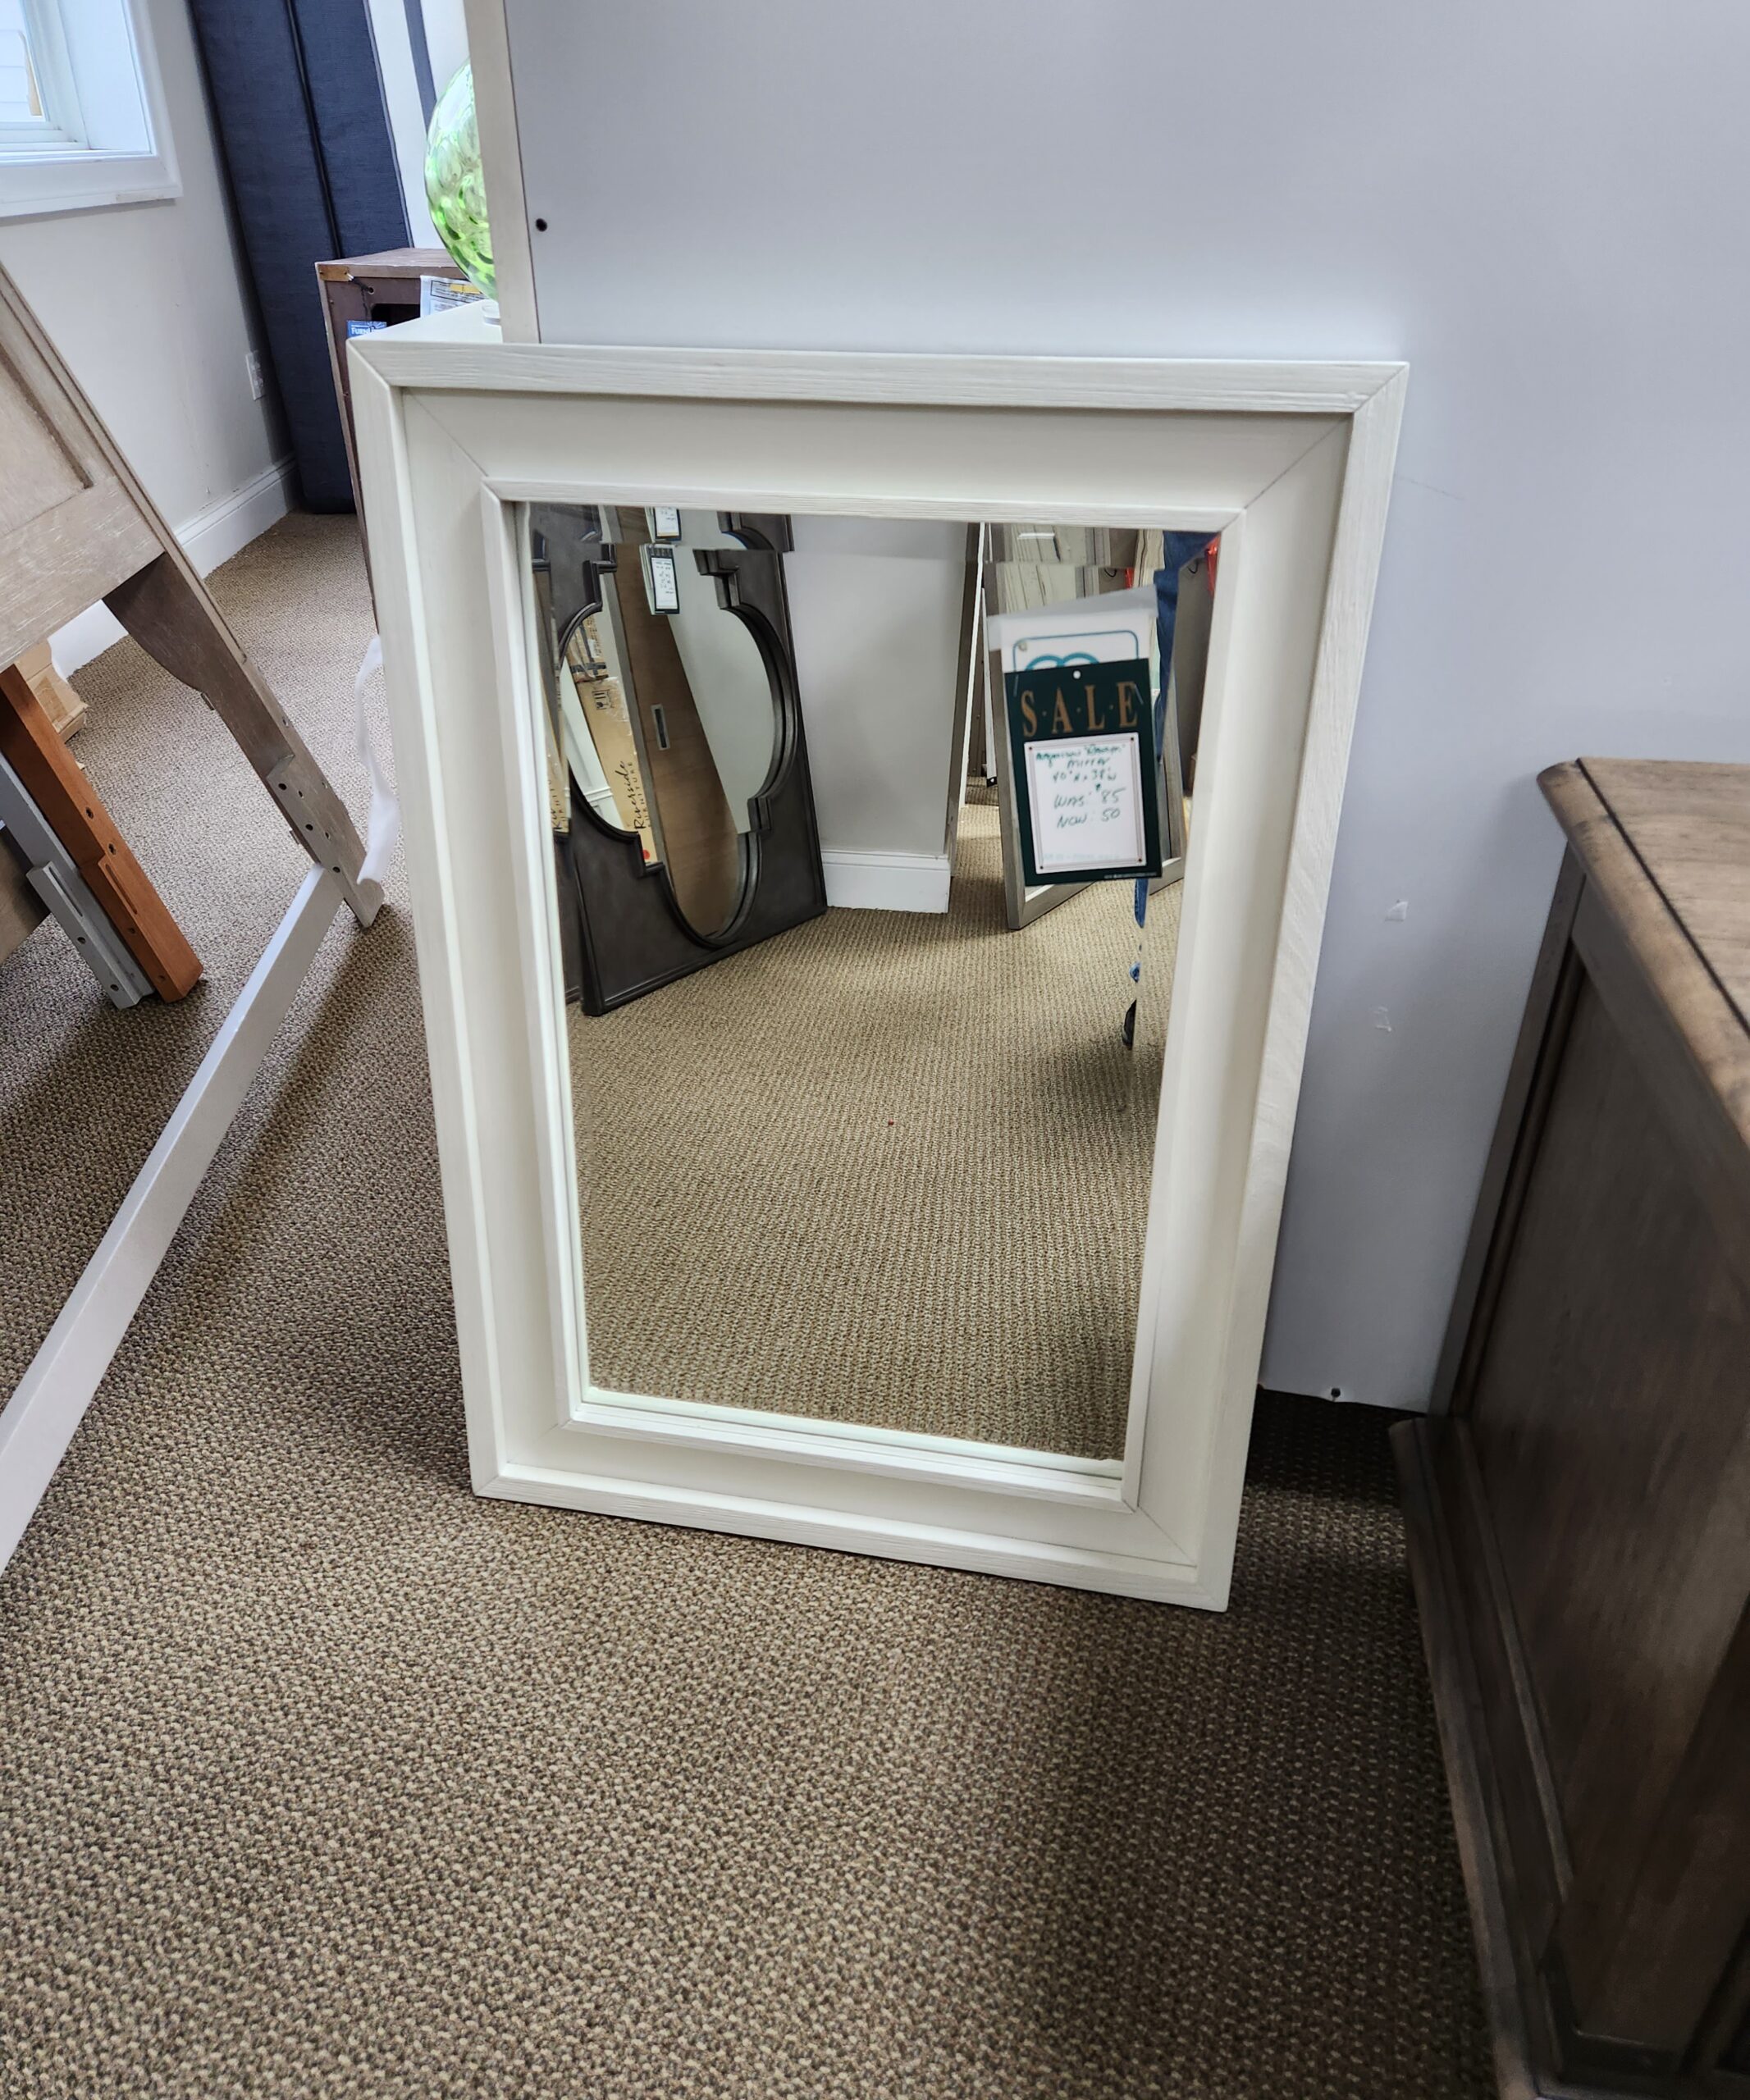 a white framed mirror hanging on the wall